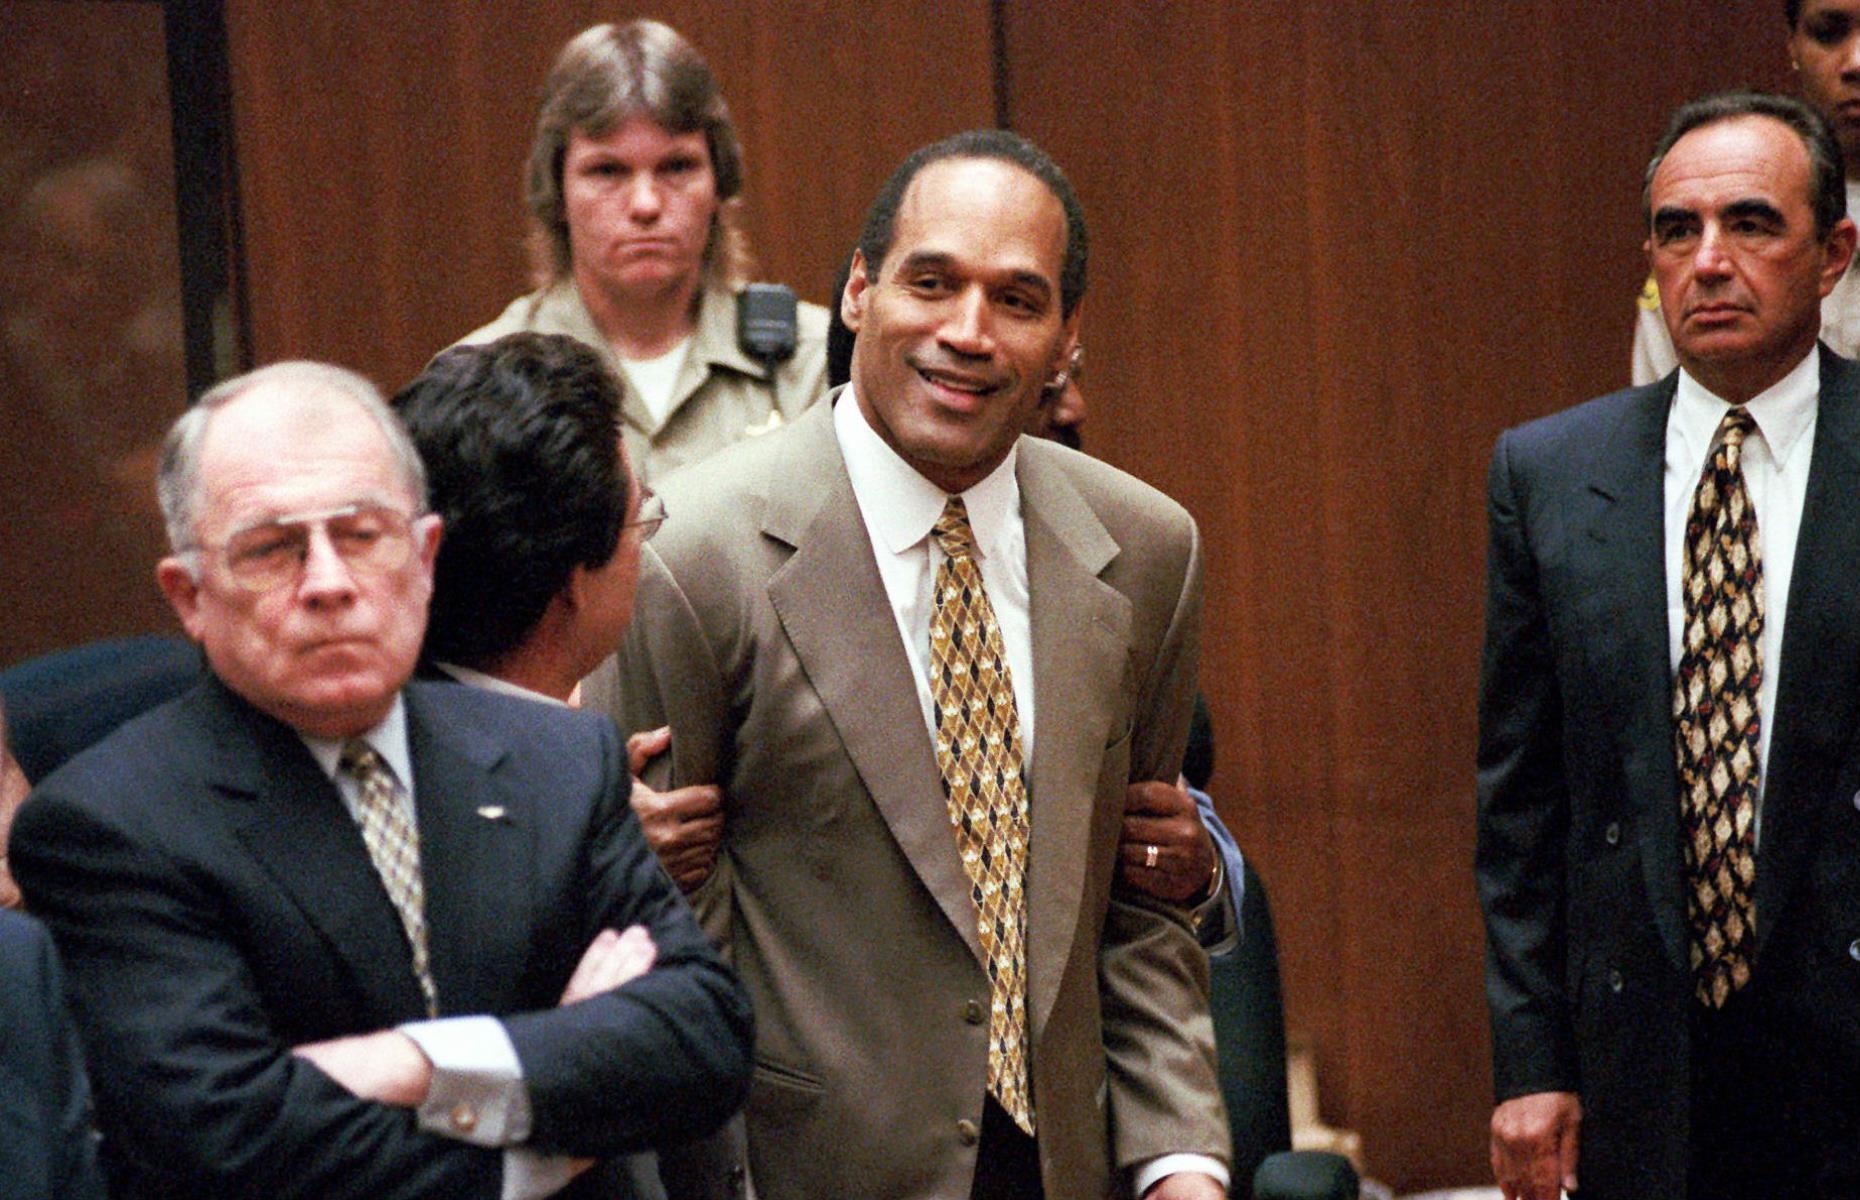 1995: O.J. Simpson acquitted of murder